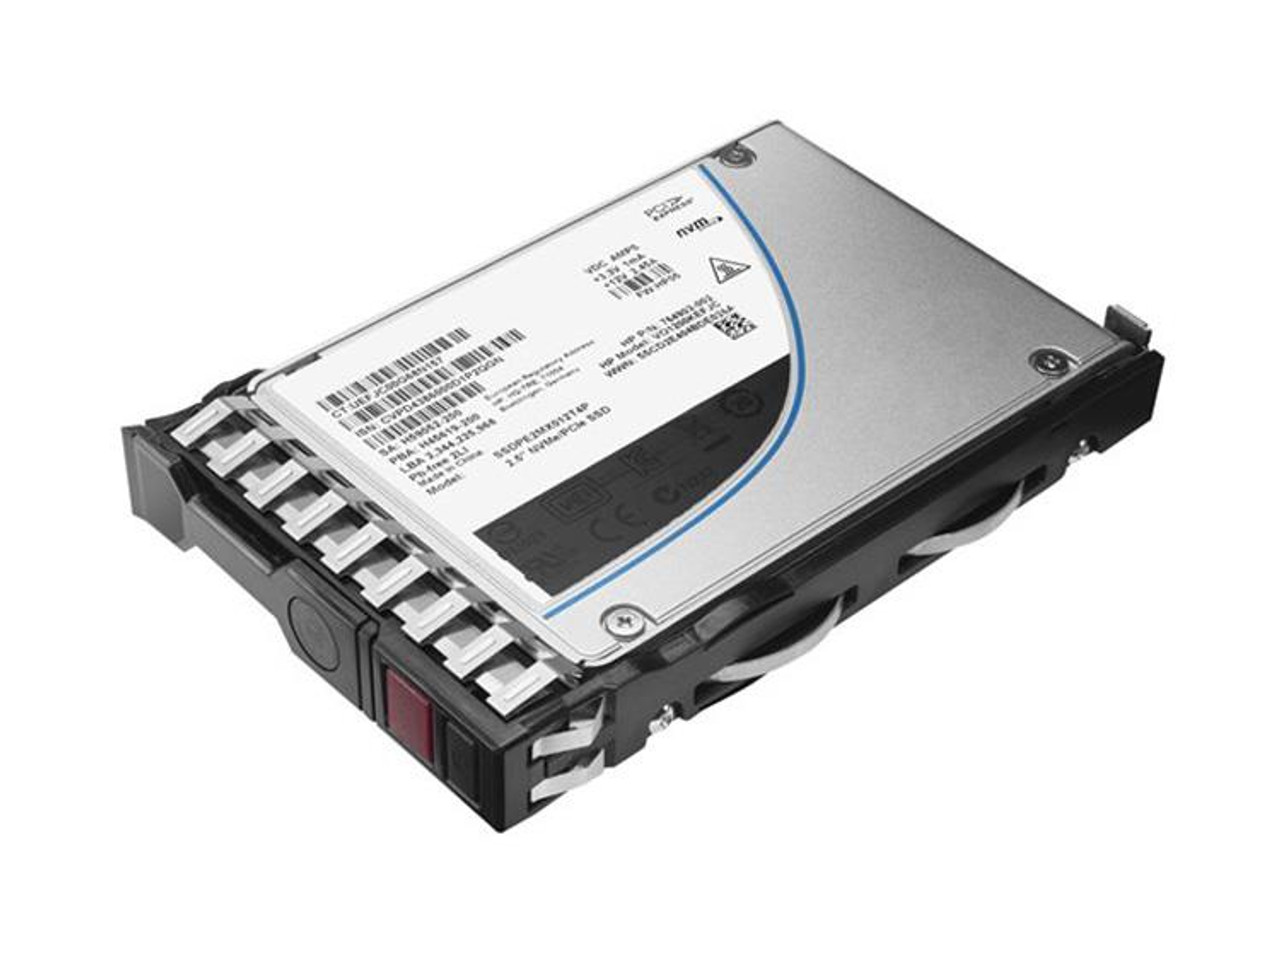 P06586-B21 HPE 1.92TB TLC SAS 12Gbps Read Intensive 2.5-inch Internal Solid State Drive (SSD) with Smart Carrier